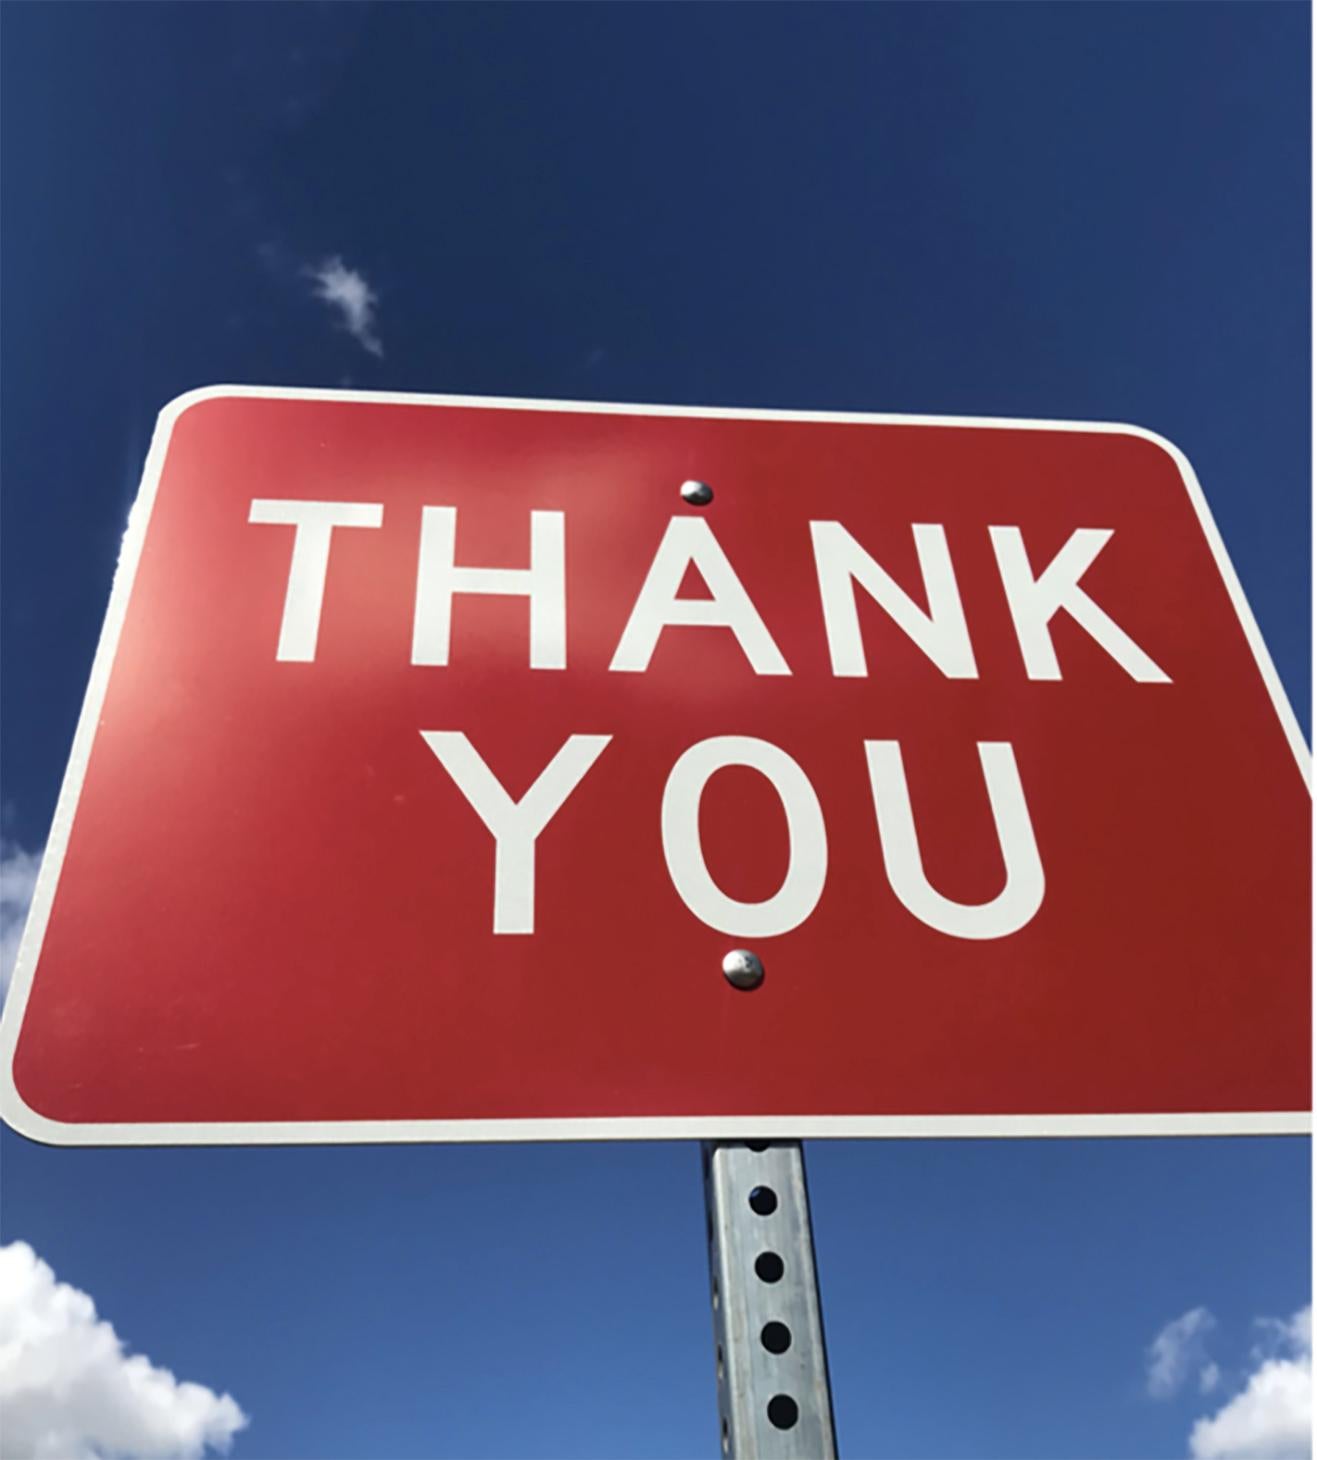 "Thank You" Contemporary Street Sign Sculpture